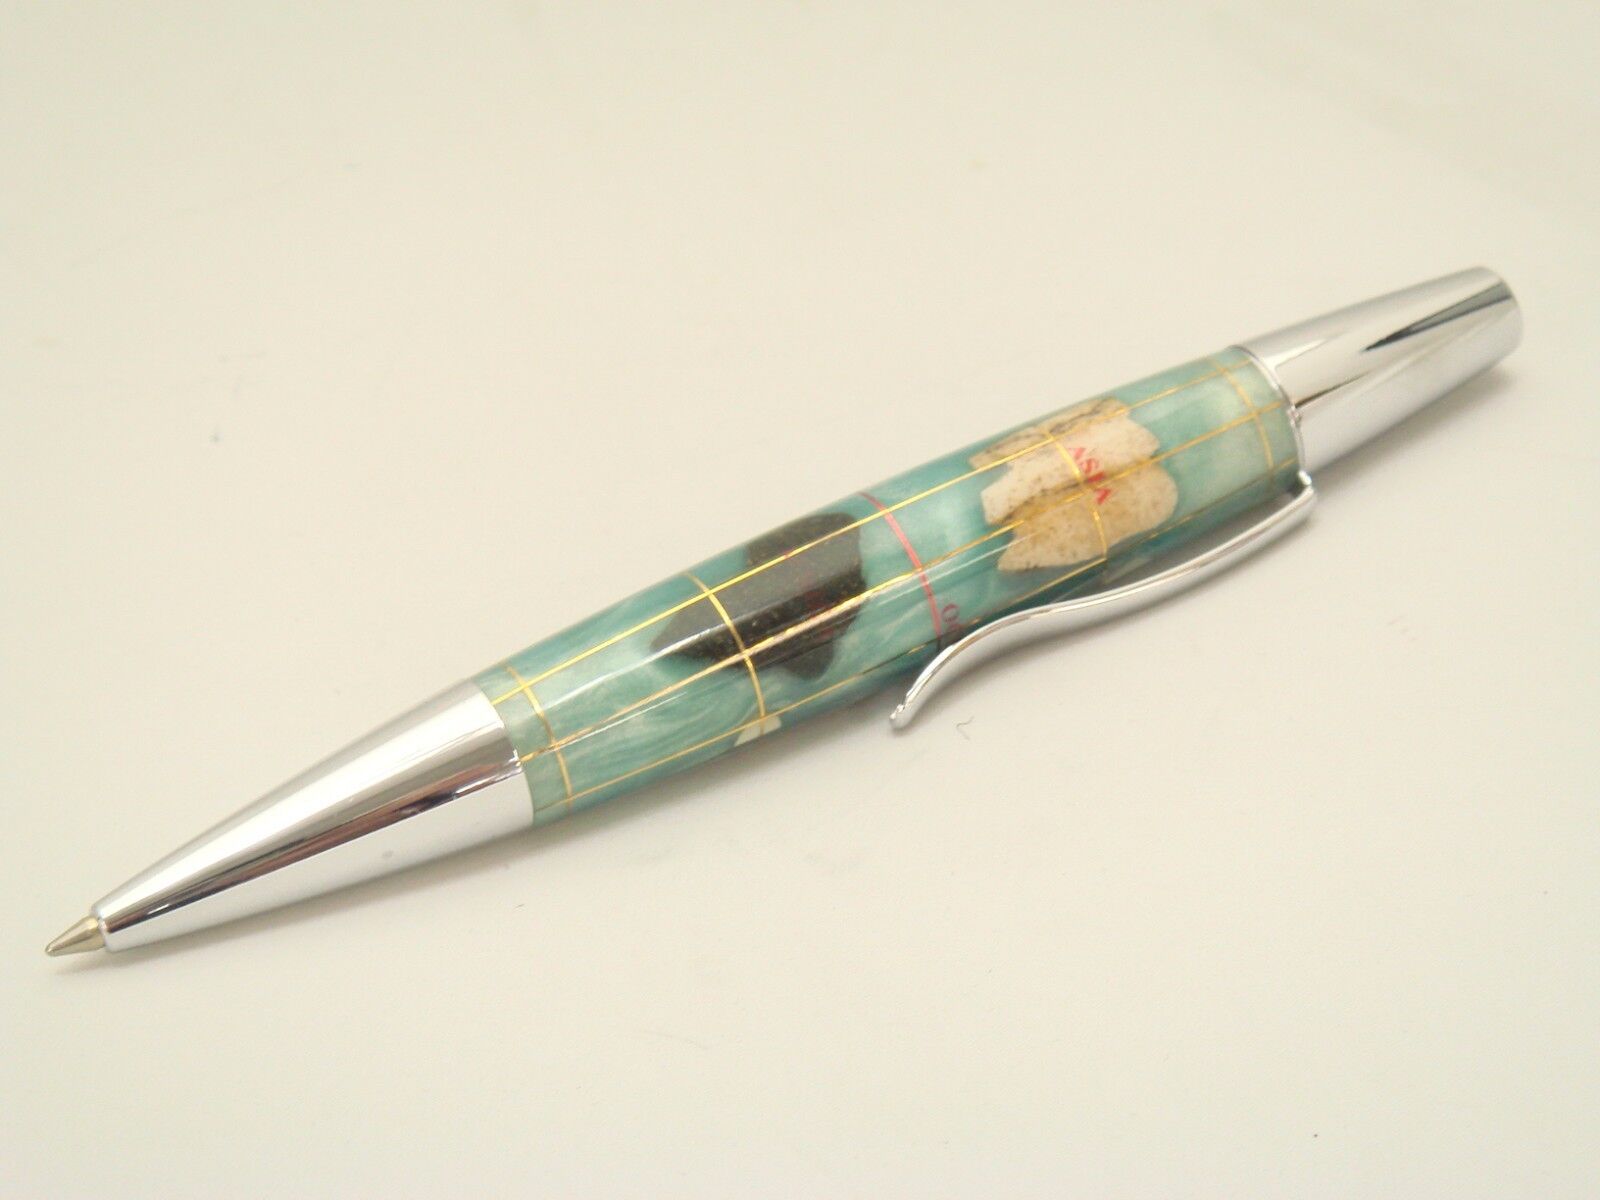 Genuine Authentic Gemstone Globe Handmade Rollerball Pen Pearl Turquoise W/Pouch